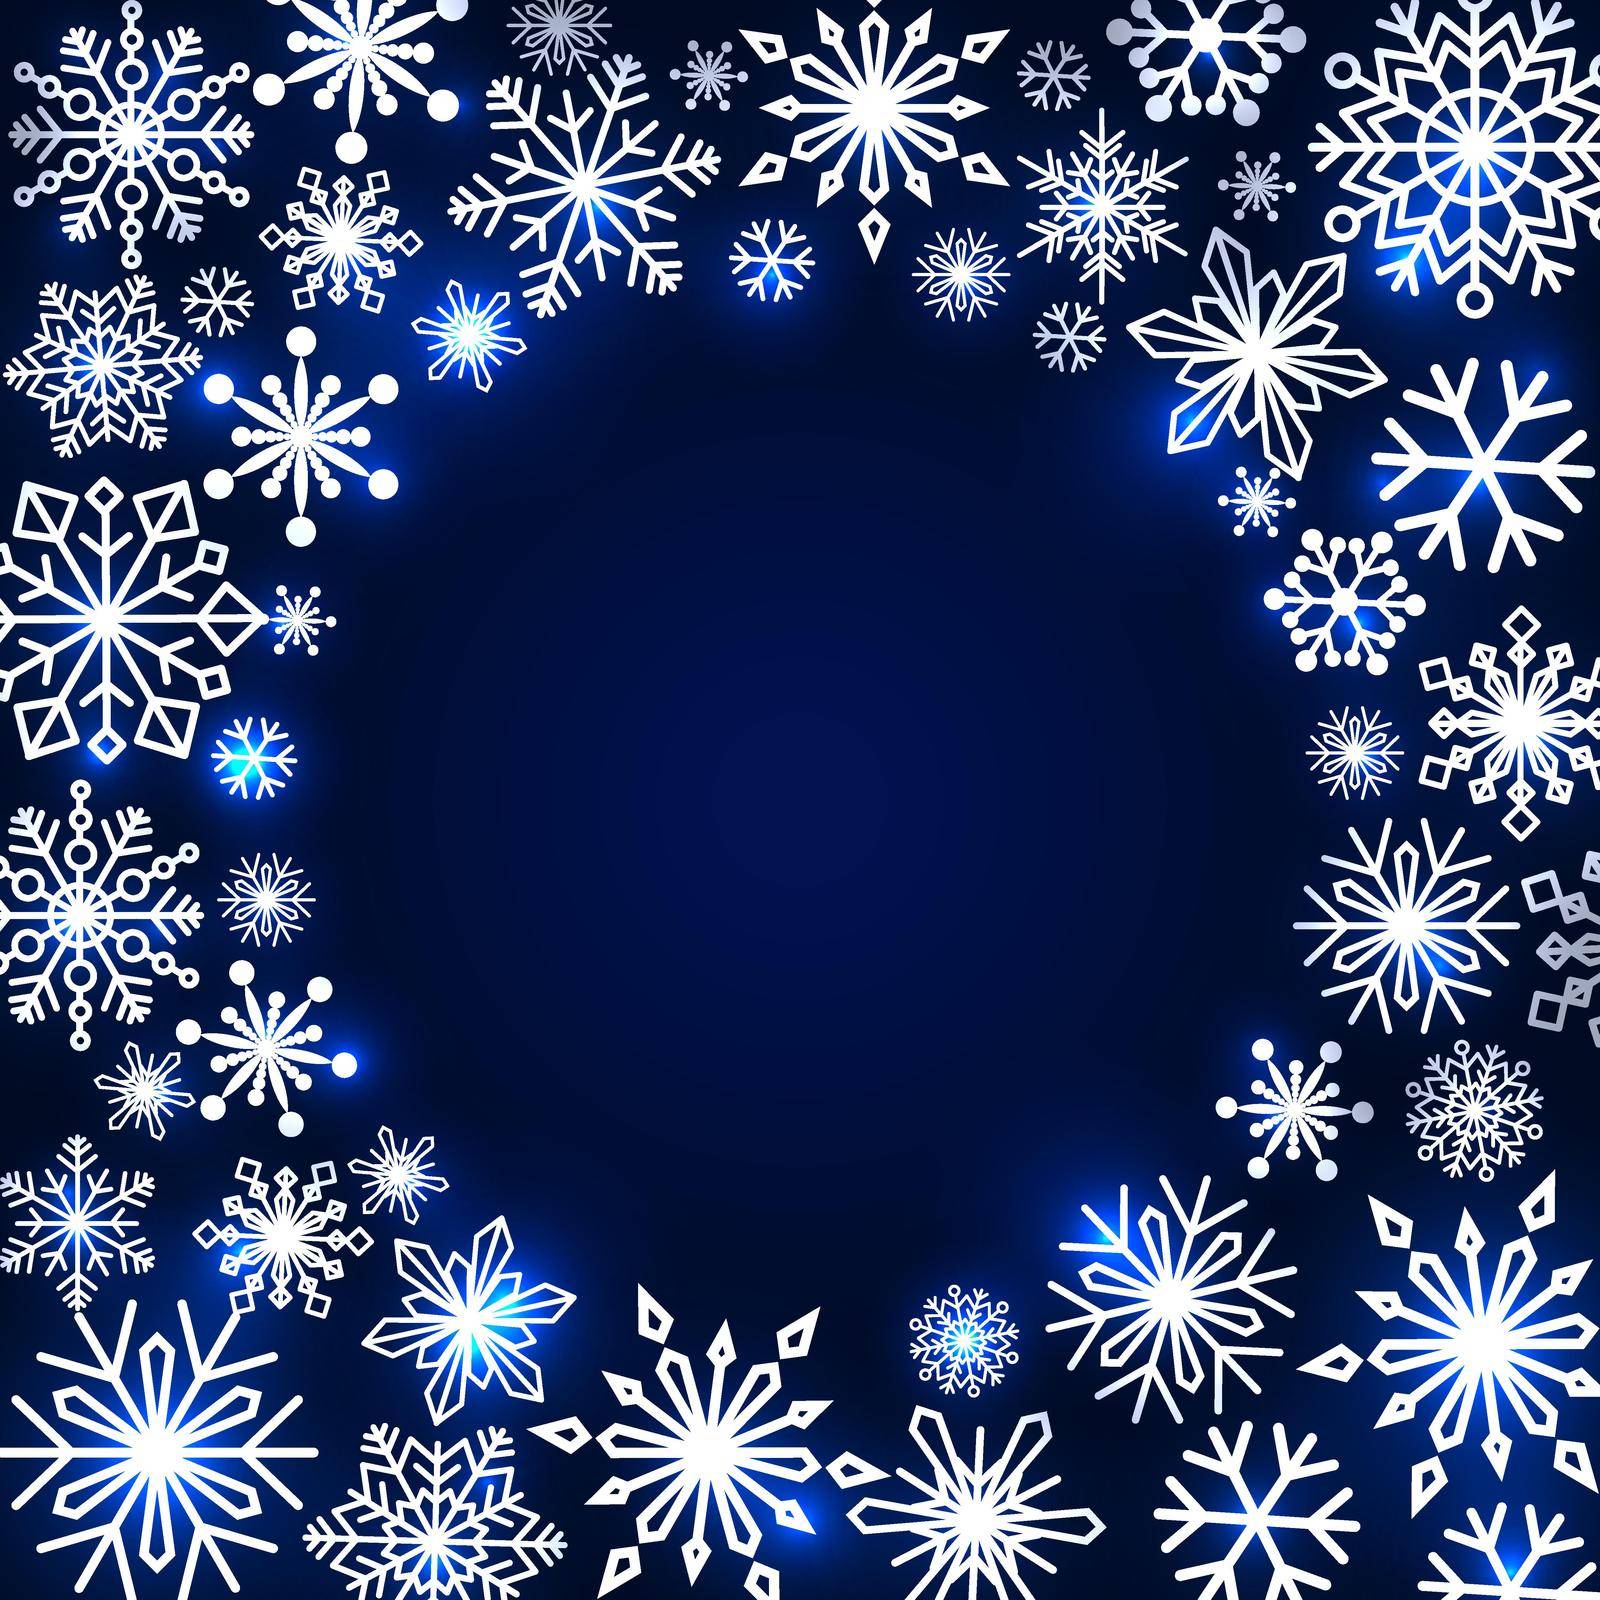 Snowflake frame. Winter theme. New Year's and Christmas. Snowflakes of different shapes and sizes. Vector llustration